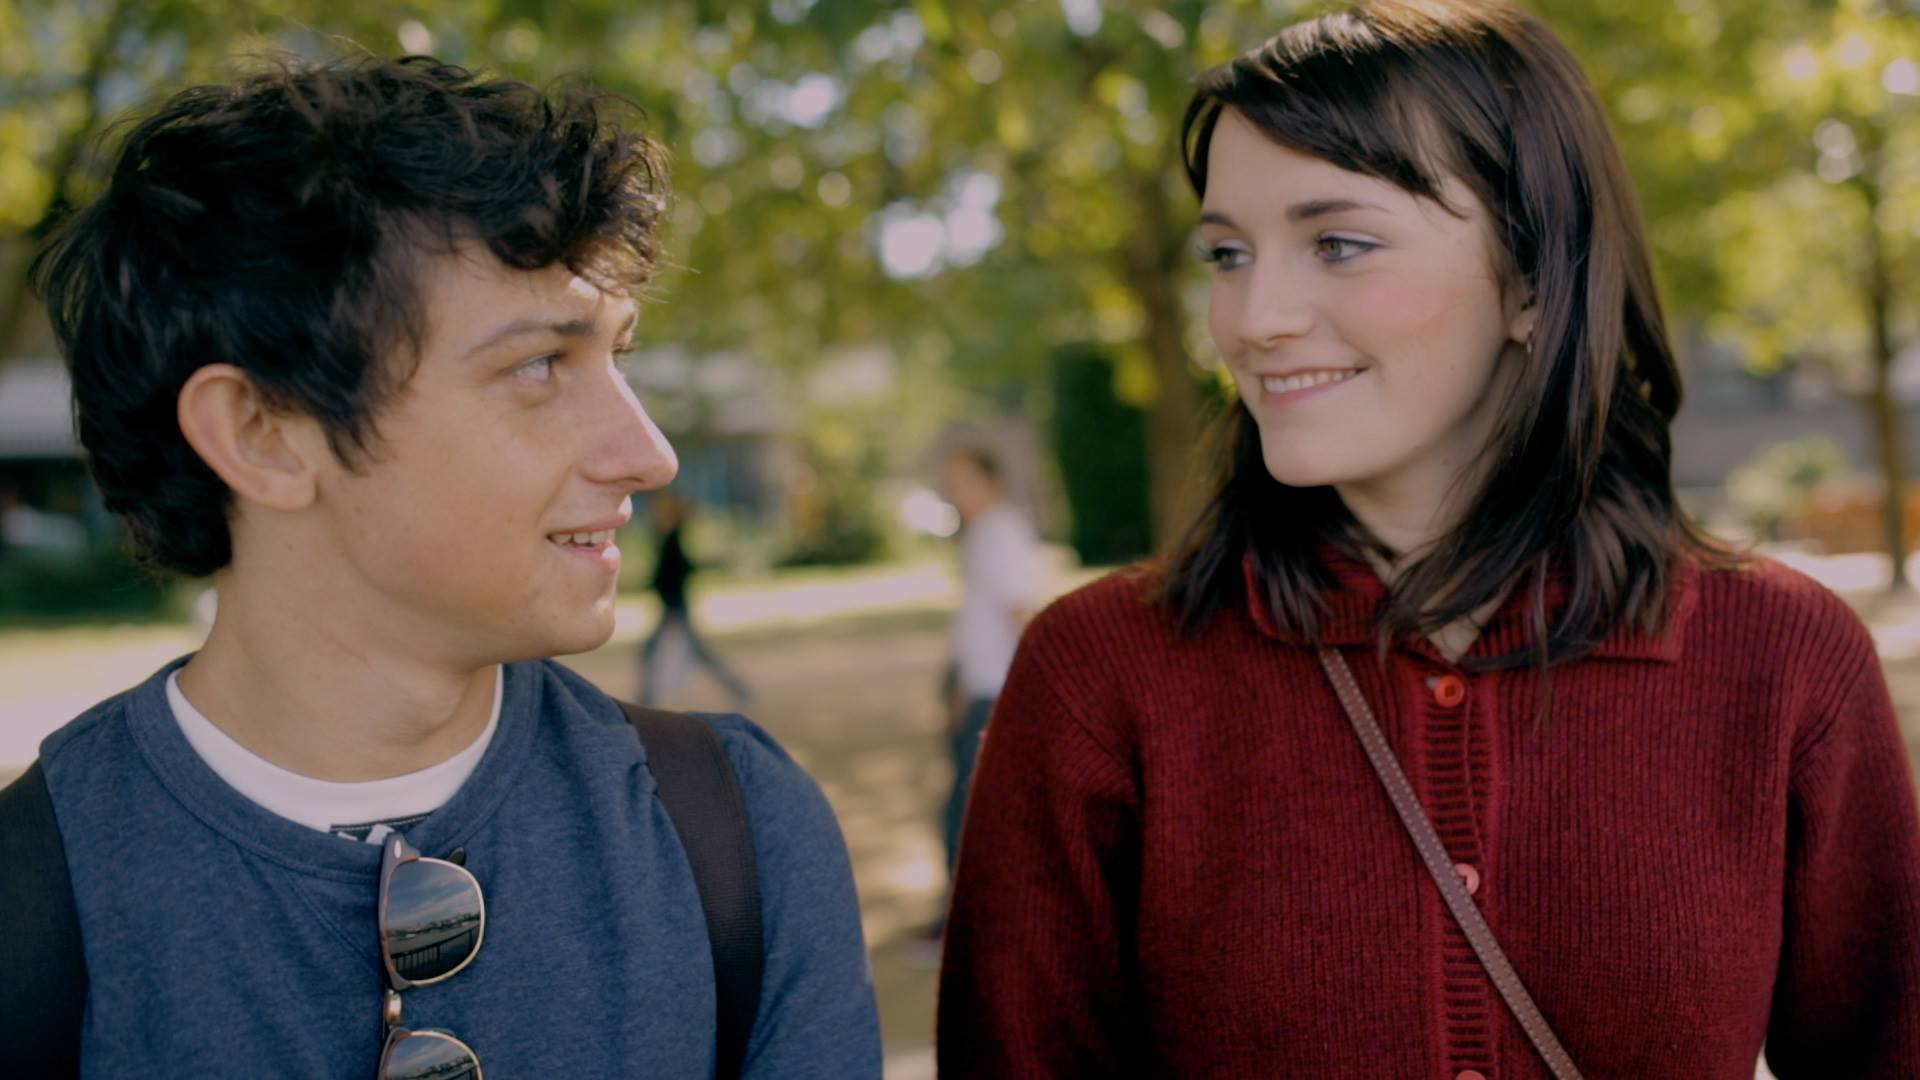 Craig-Roberts-and-Charlotte-Ritchie-in-Benny-&-Jolene